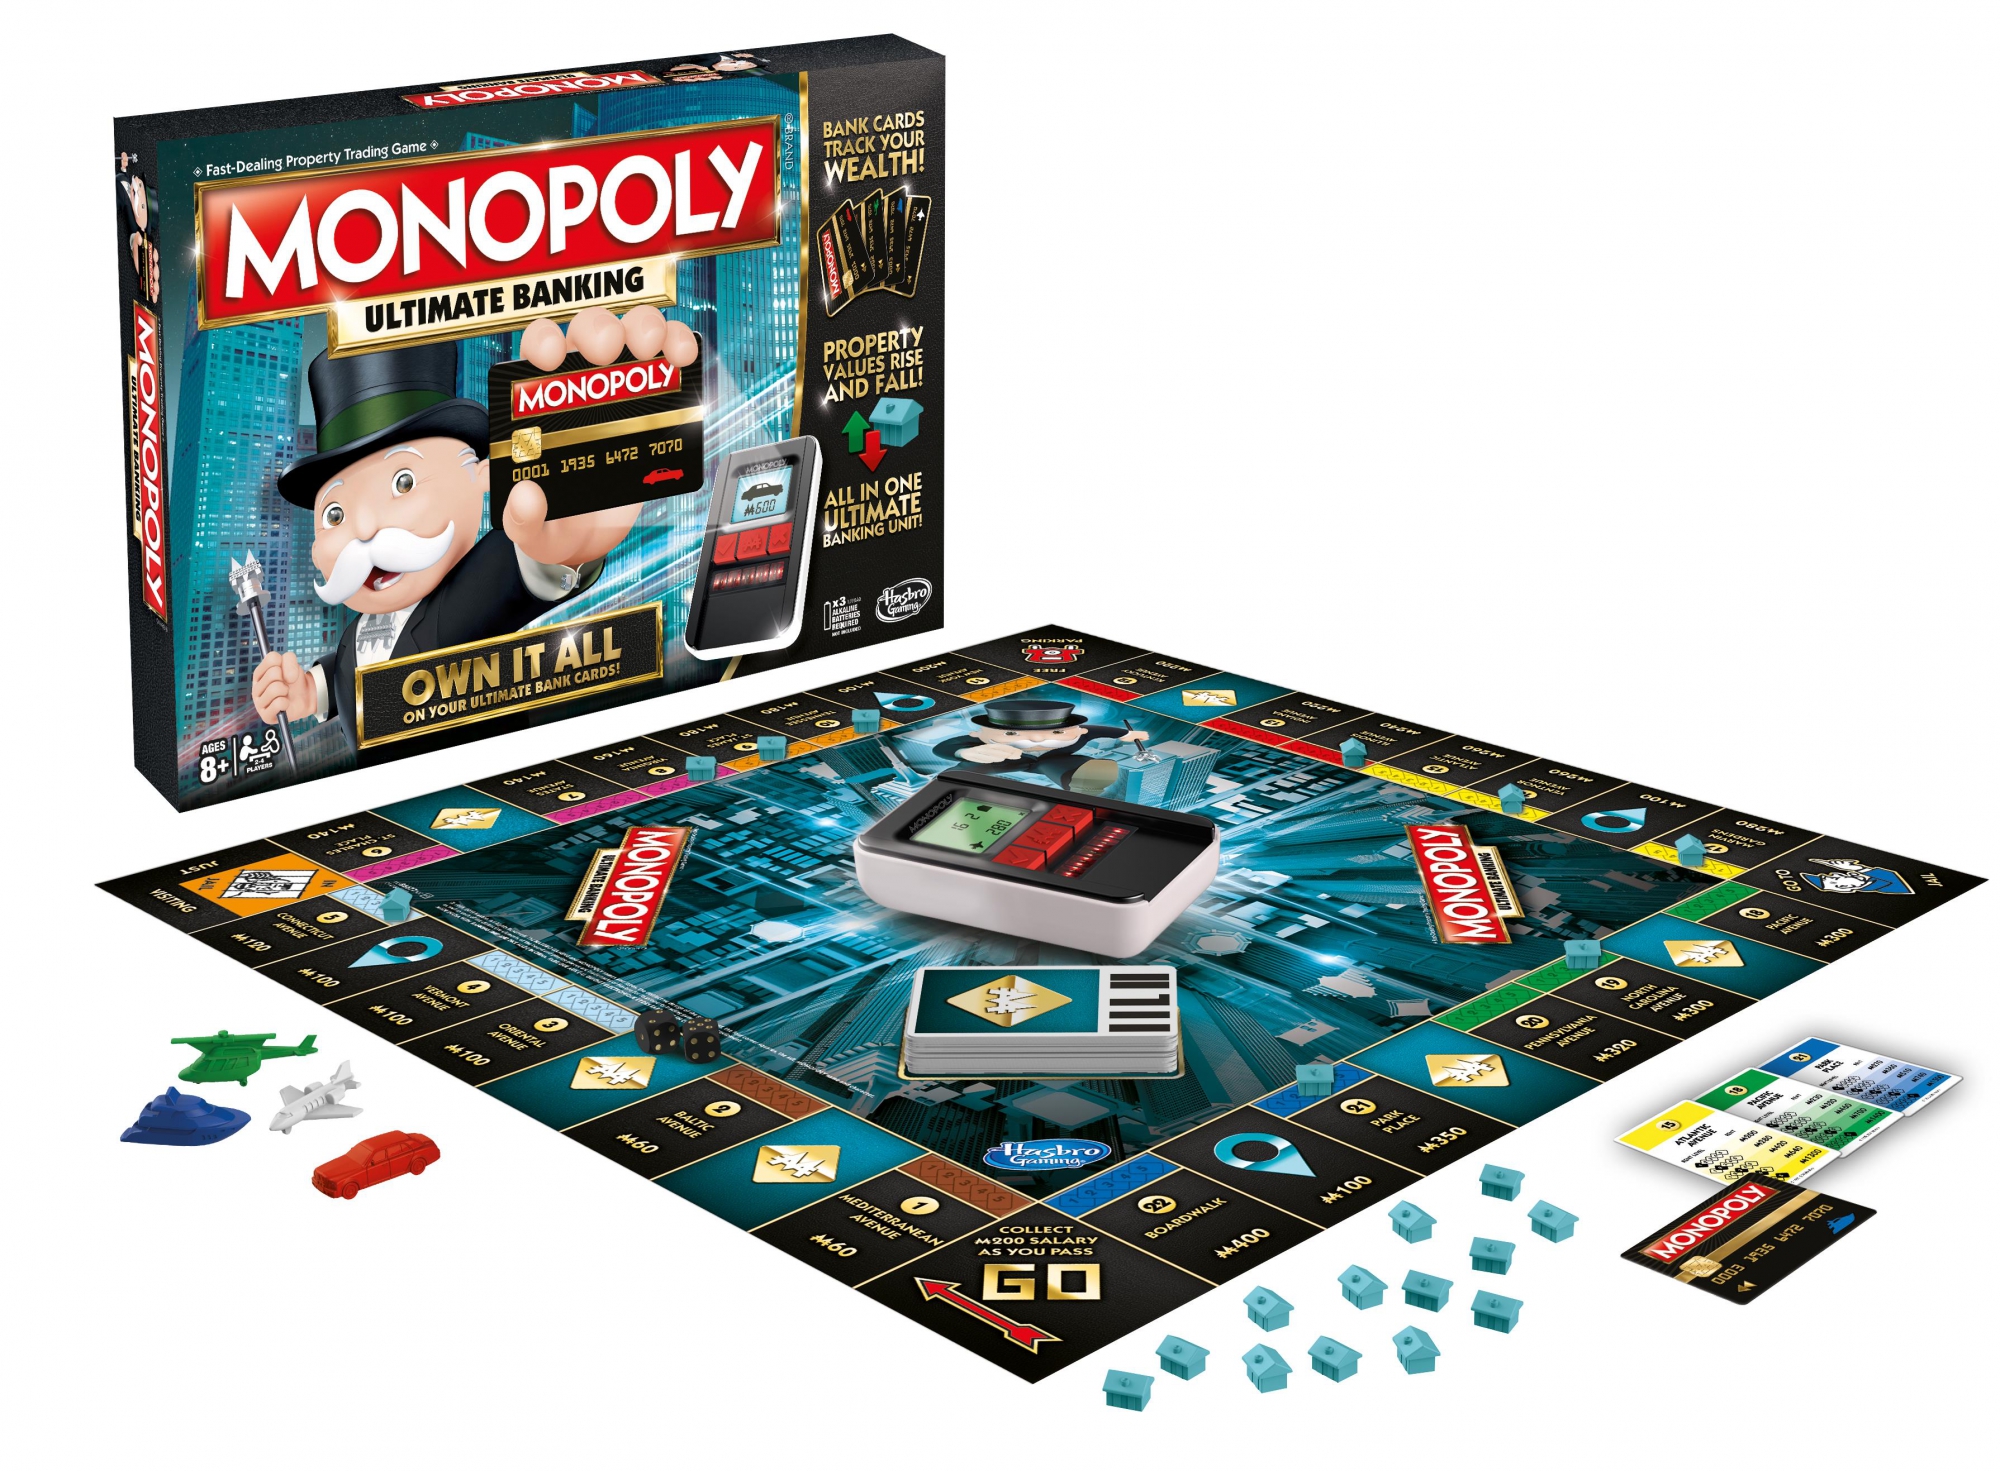 Monopoly: Ultimate banking